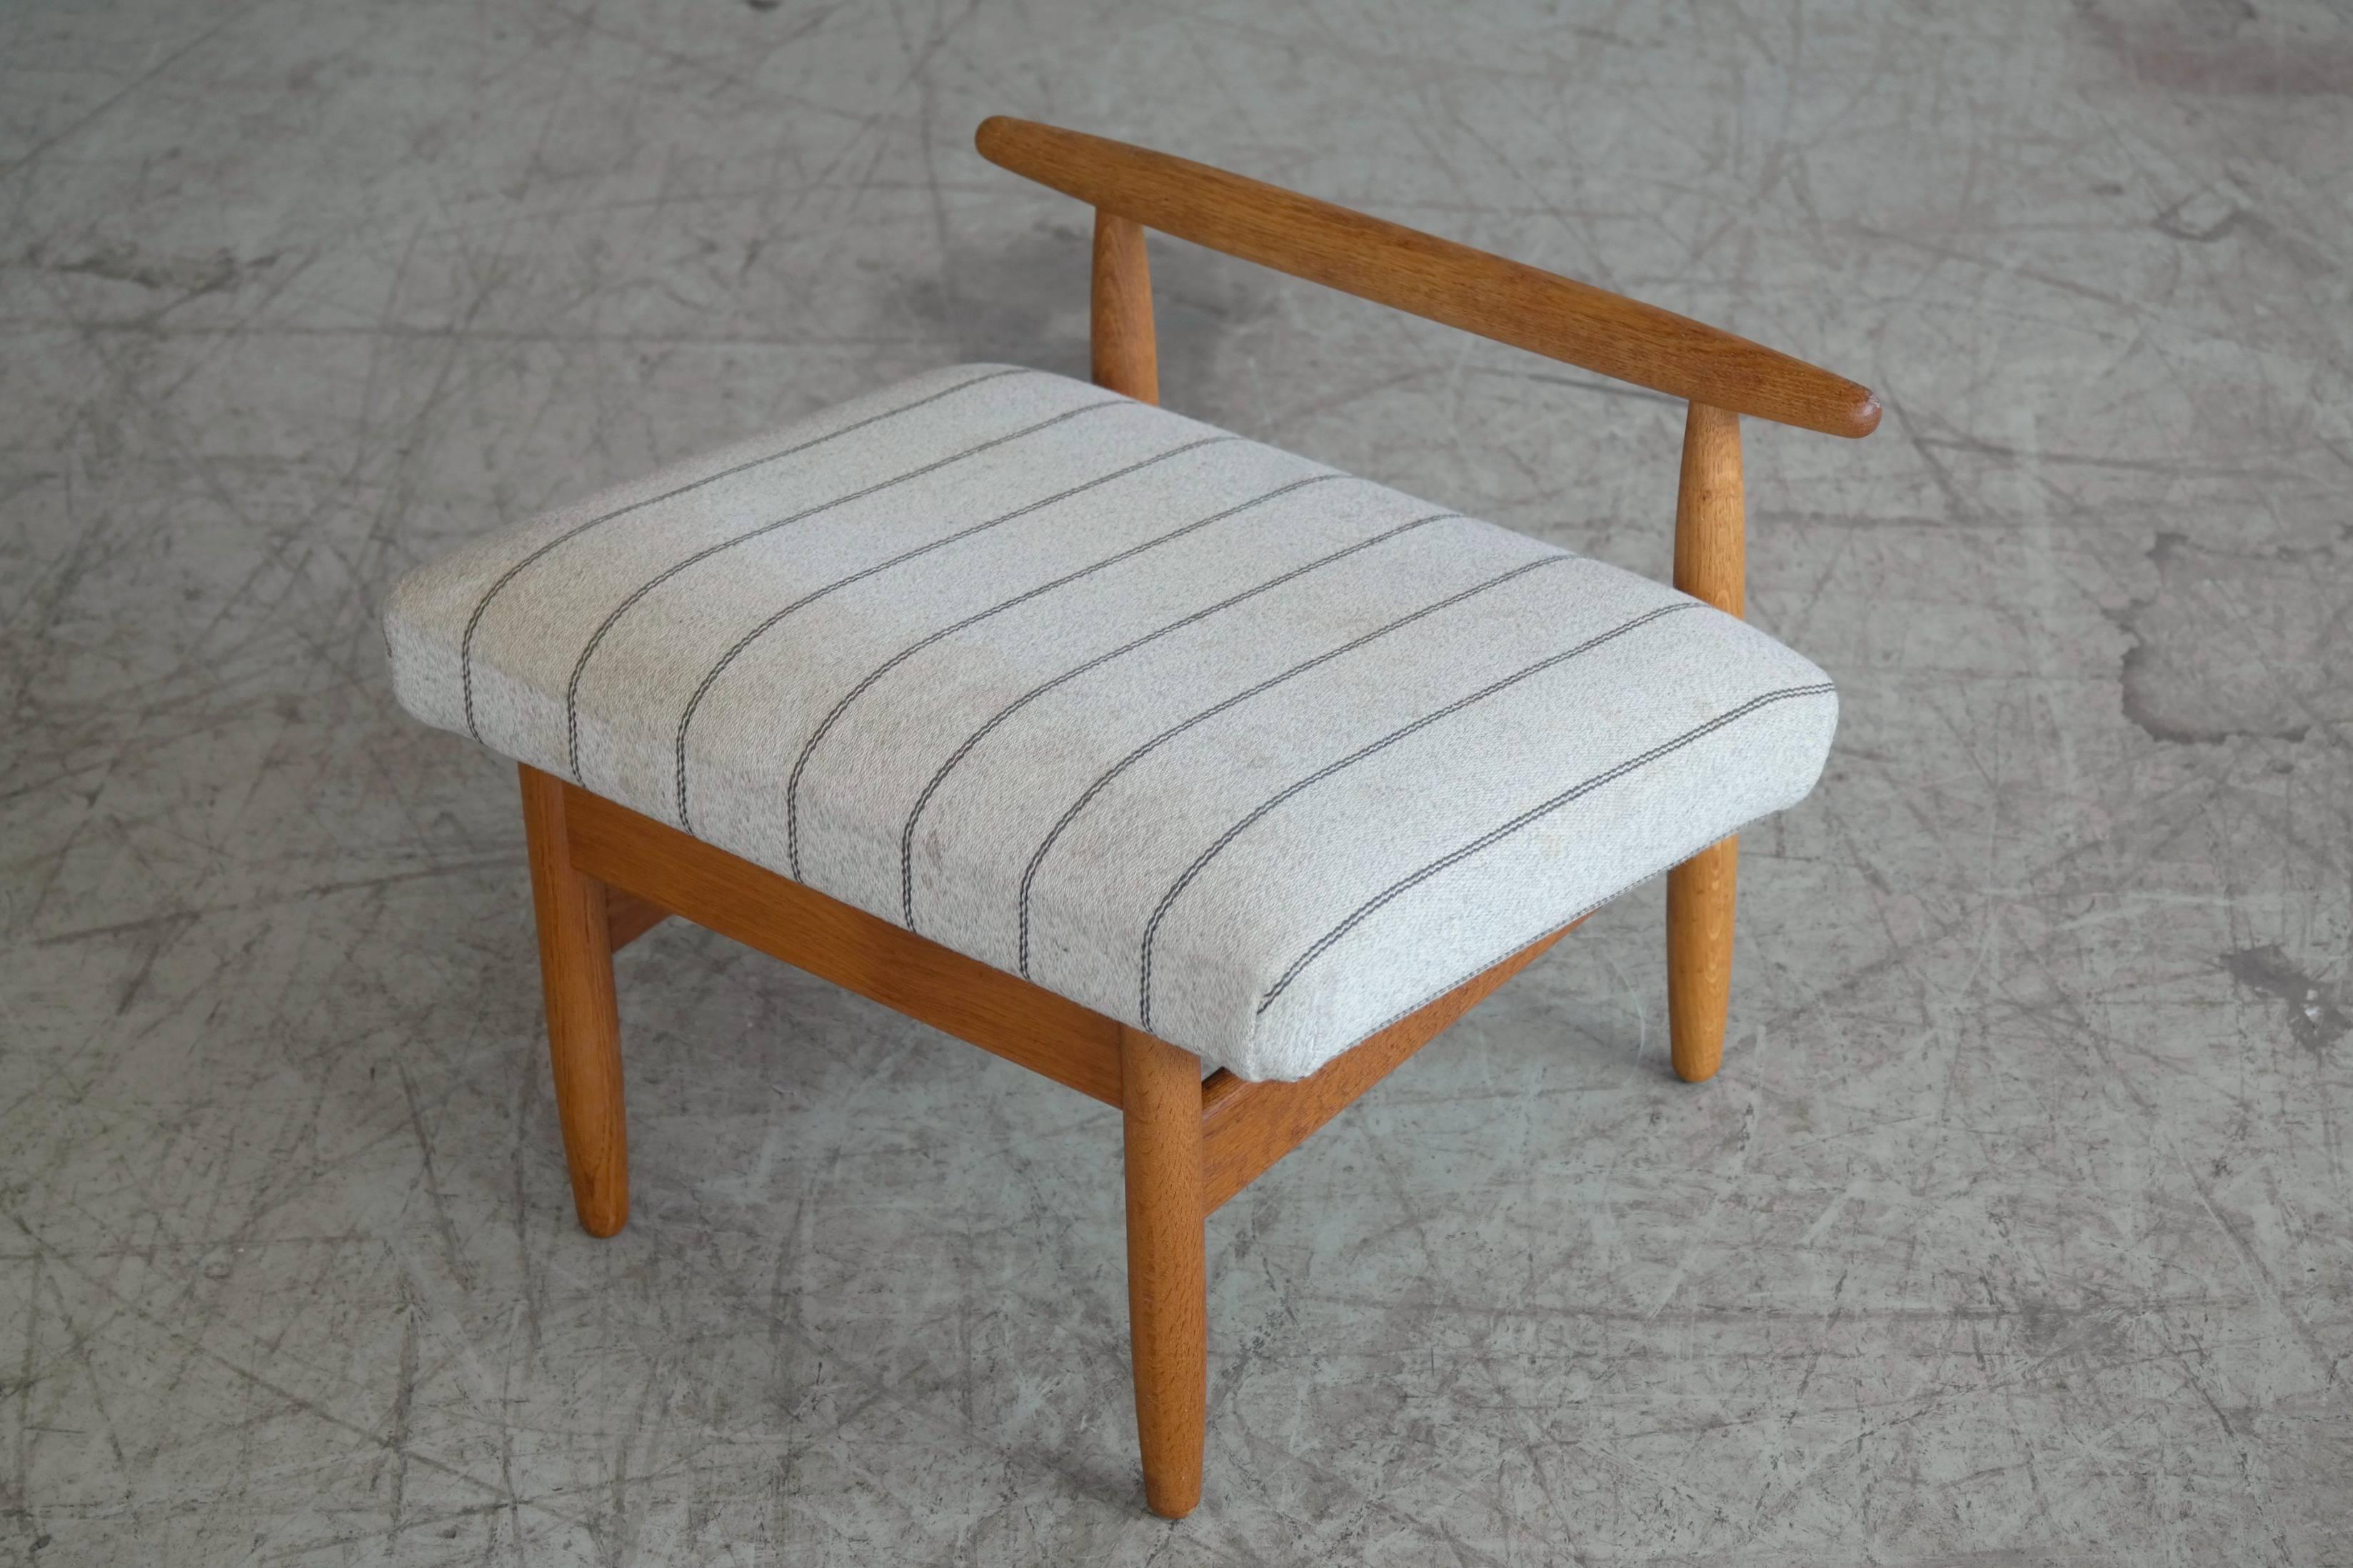 Elegant footstool model J65 designed by Ejvind Johansson in 1956 for FDB Mobler, Denmark. Solid oak and original wool fabric. Nice grain and patina to the wood, while the fabric is showing some light soiling and would benefit from being